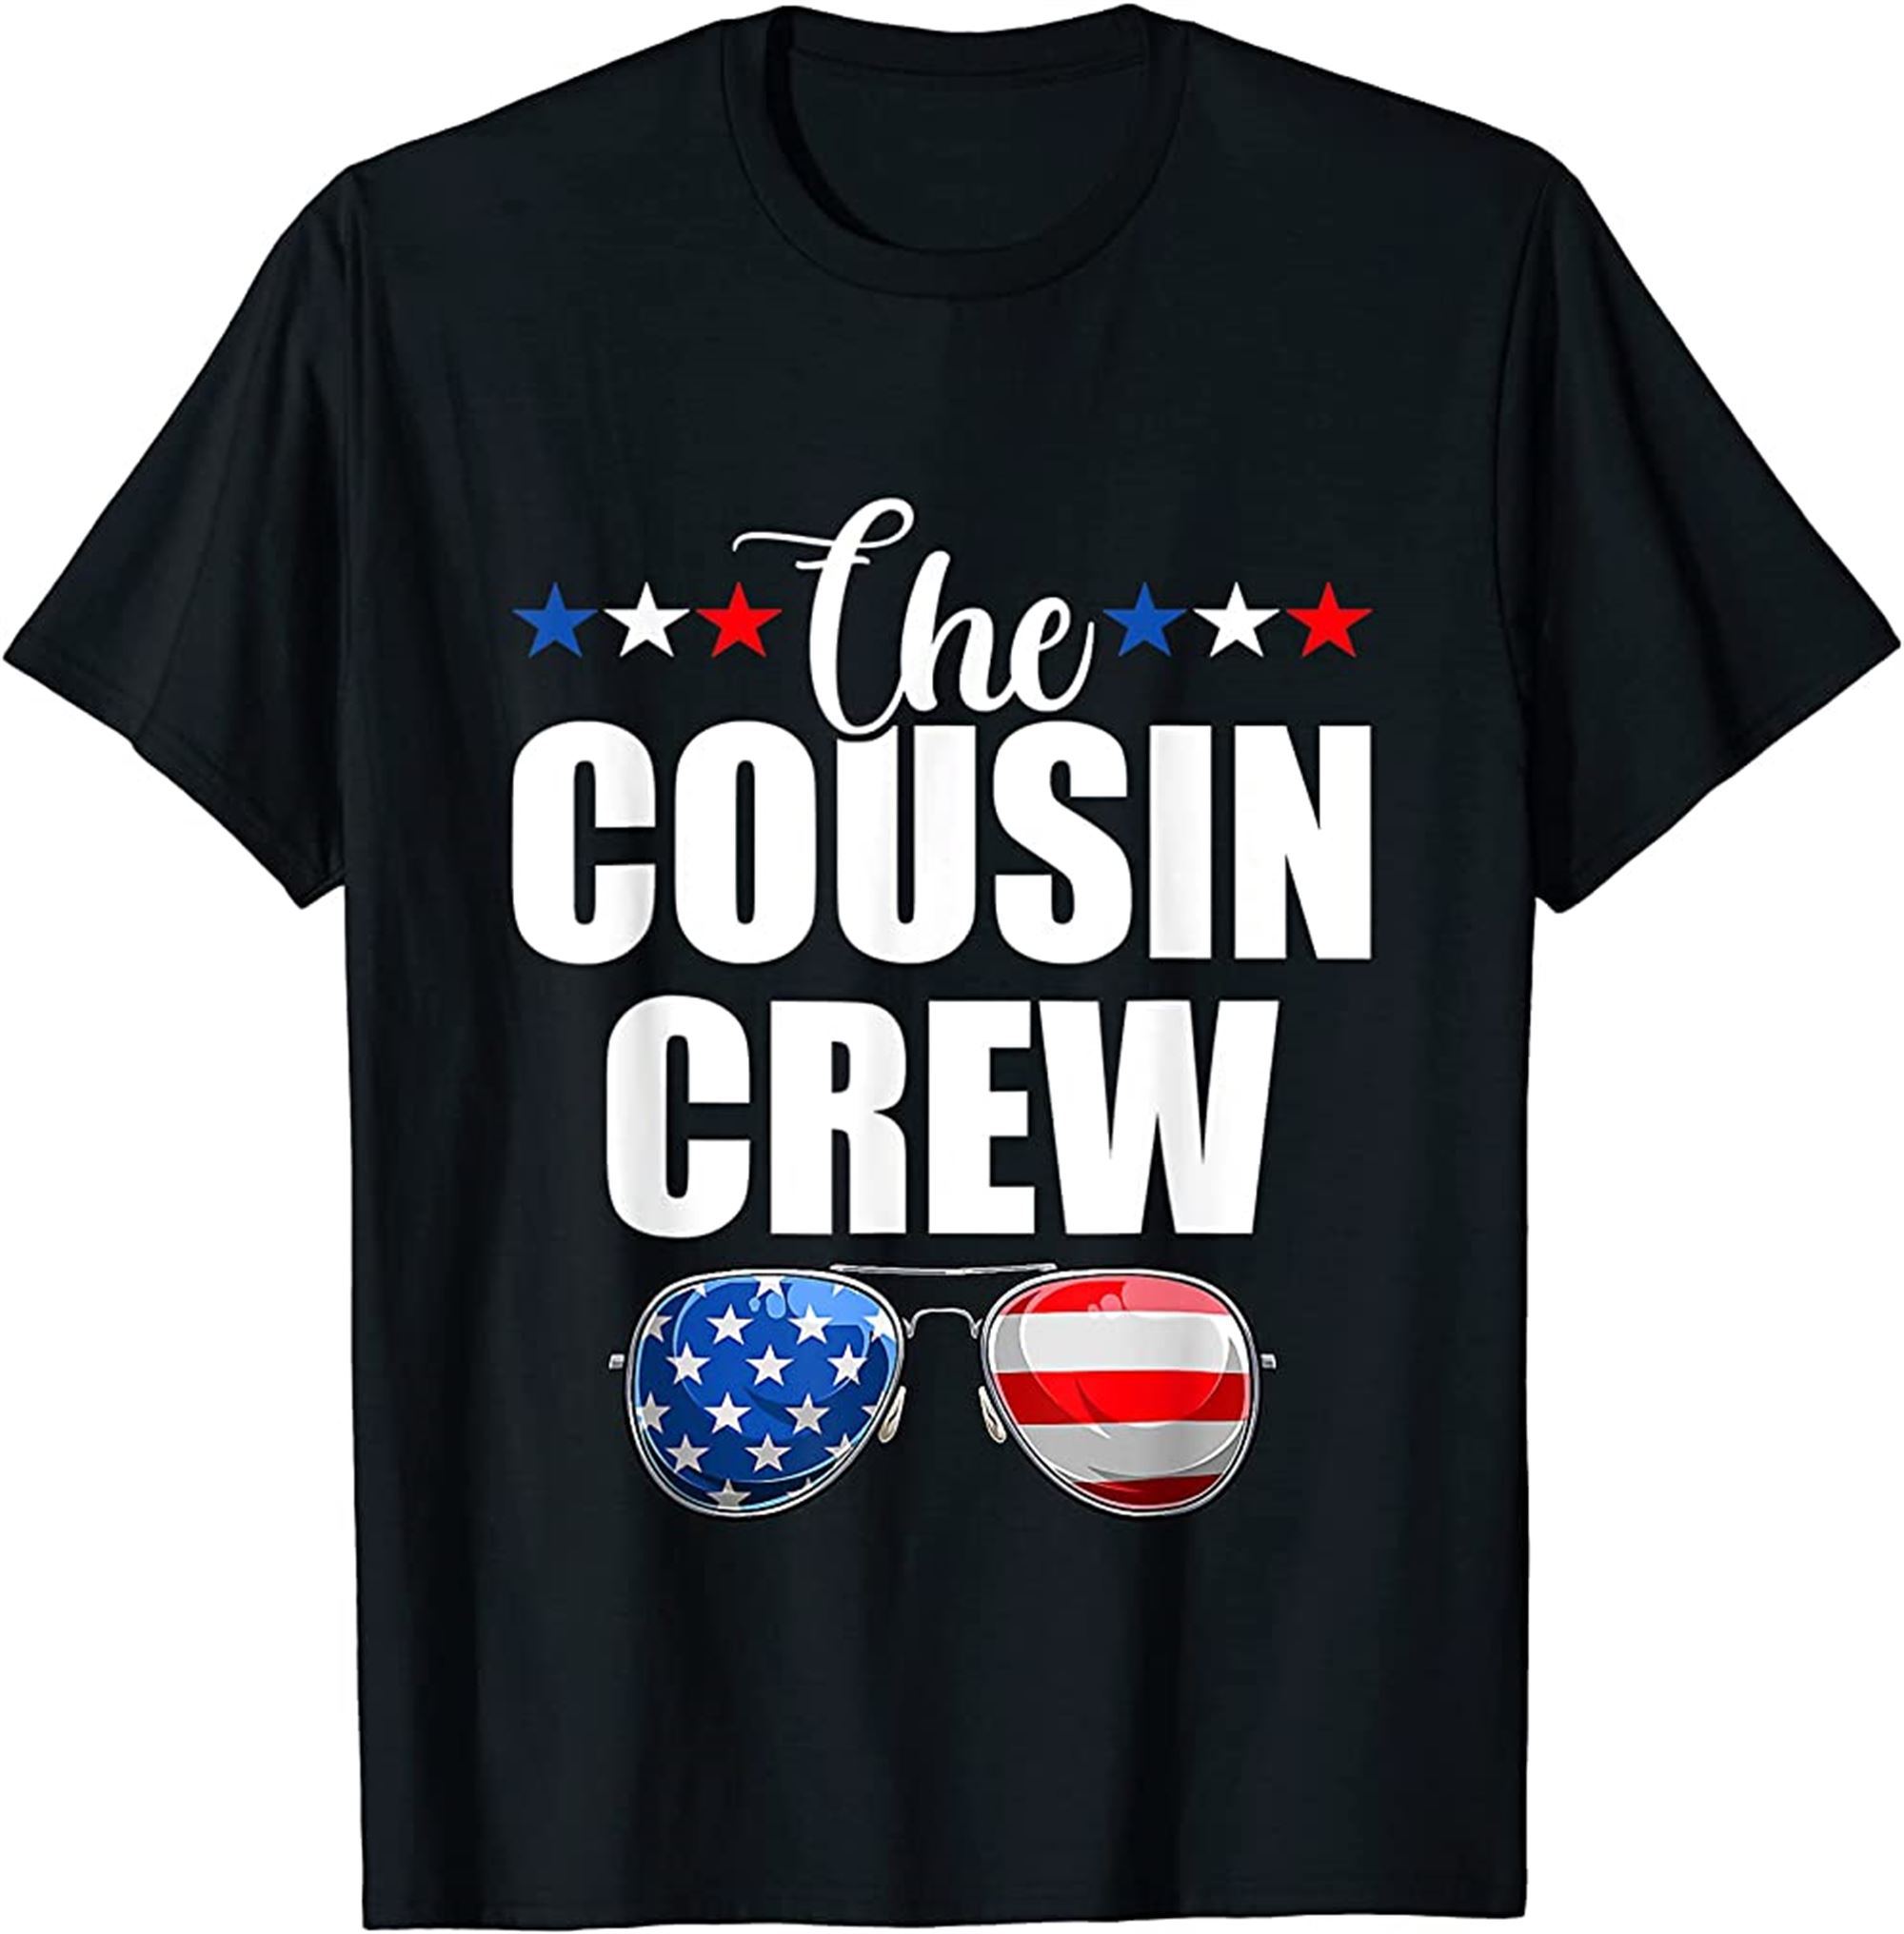 Patriotic Cousin Crew 4th Of July All Cousin Crew American T-shirt Full Size Up To 5xl